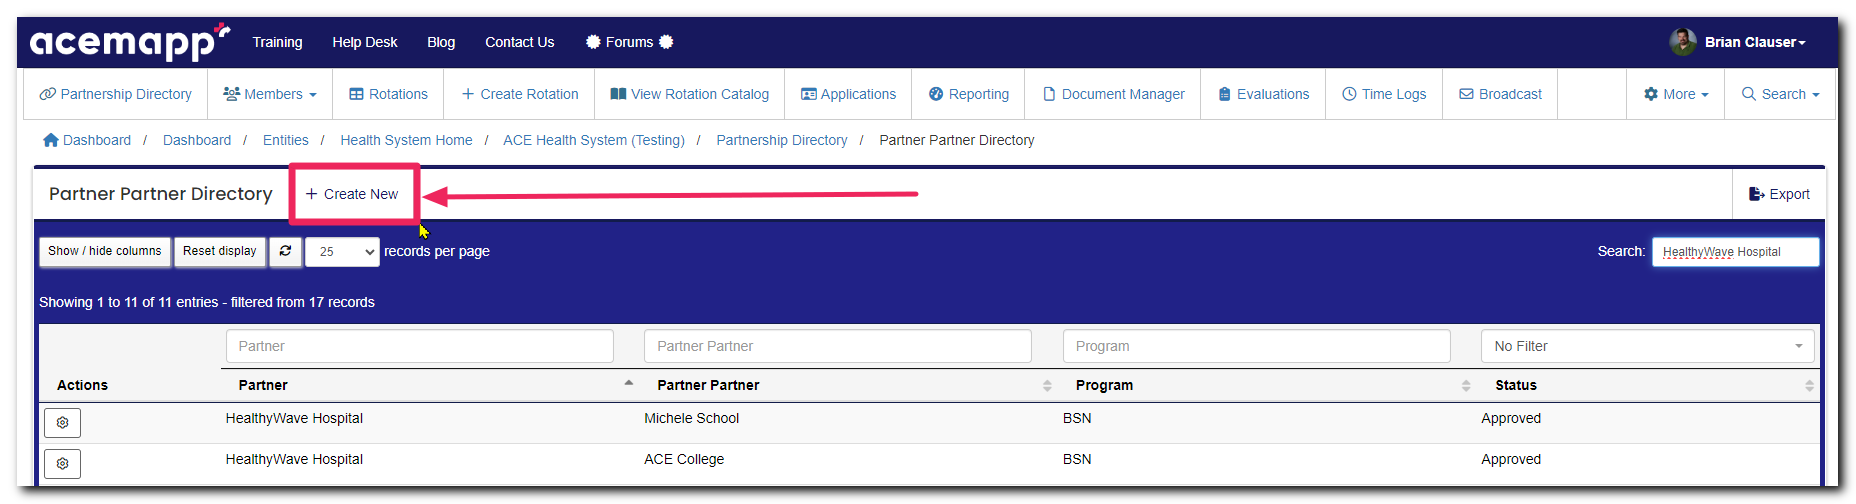 Partner Partner Directory page highlighting Create New button